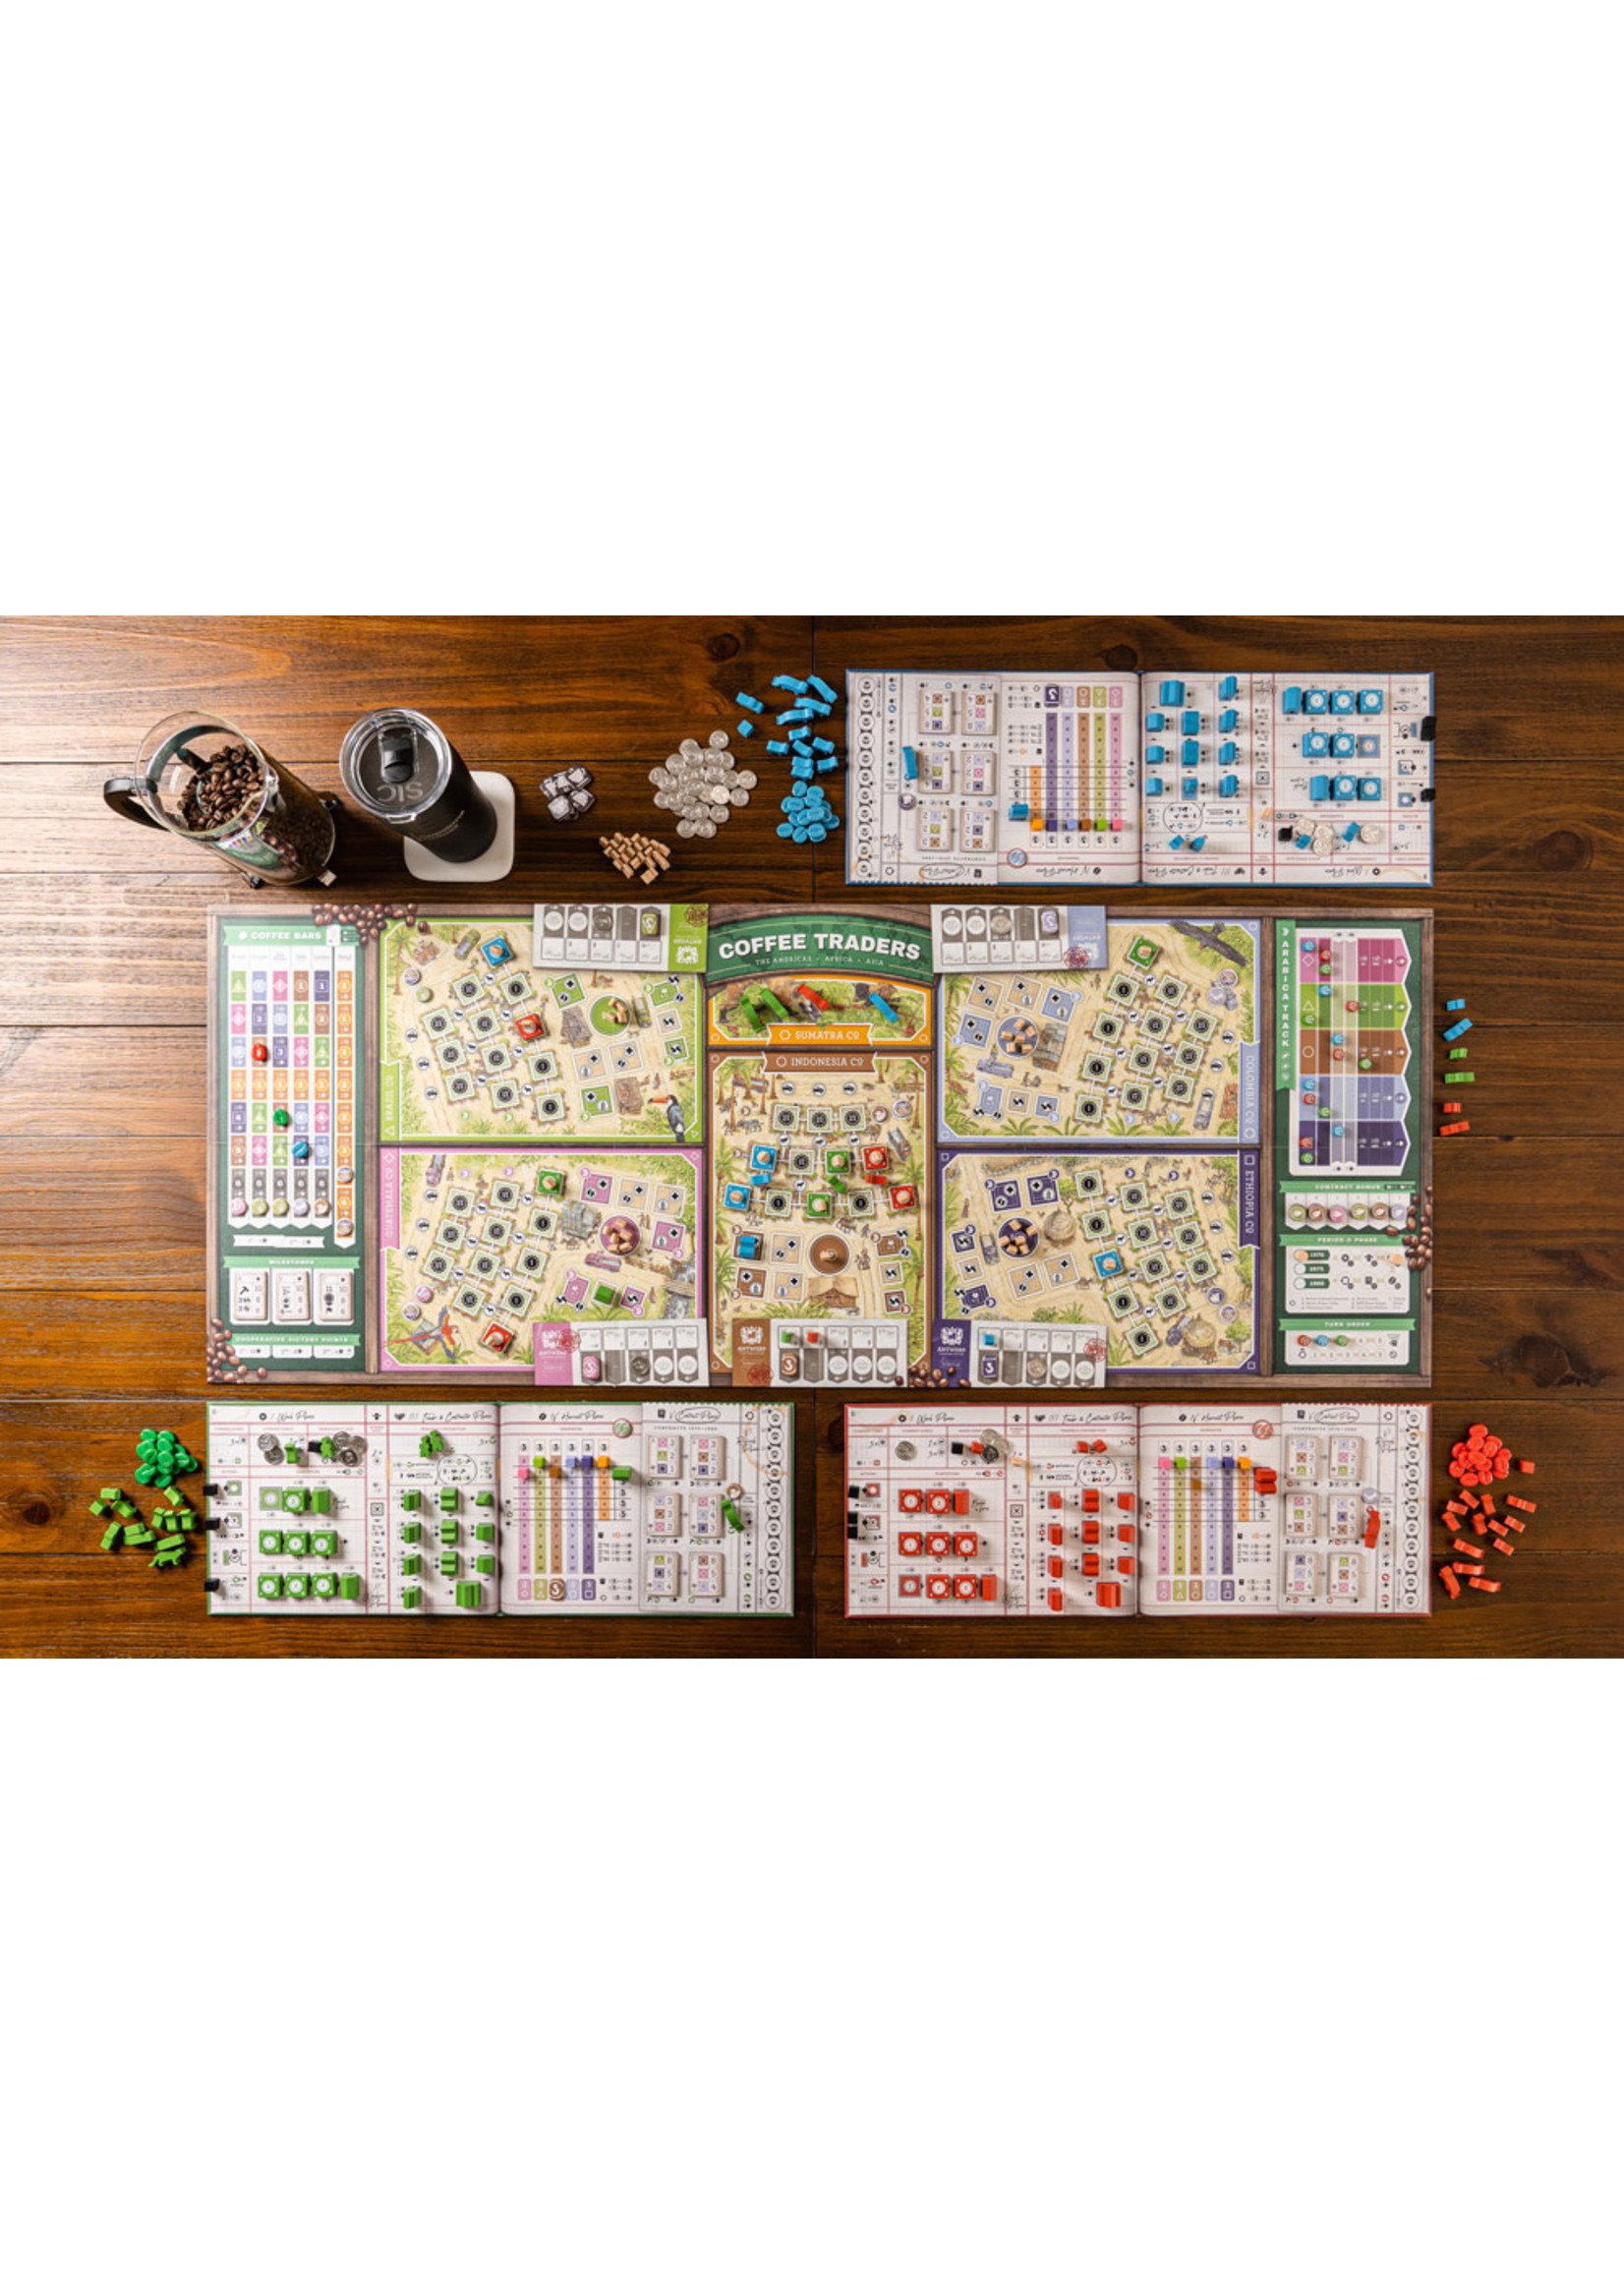 Capstone Games Coffee Traders